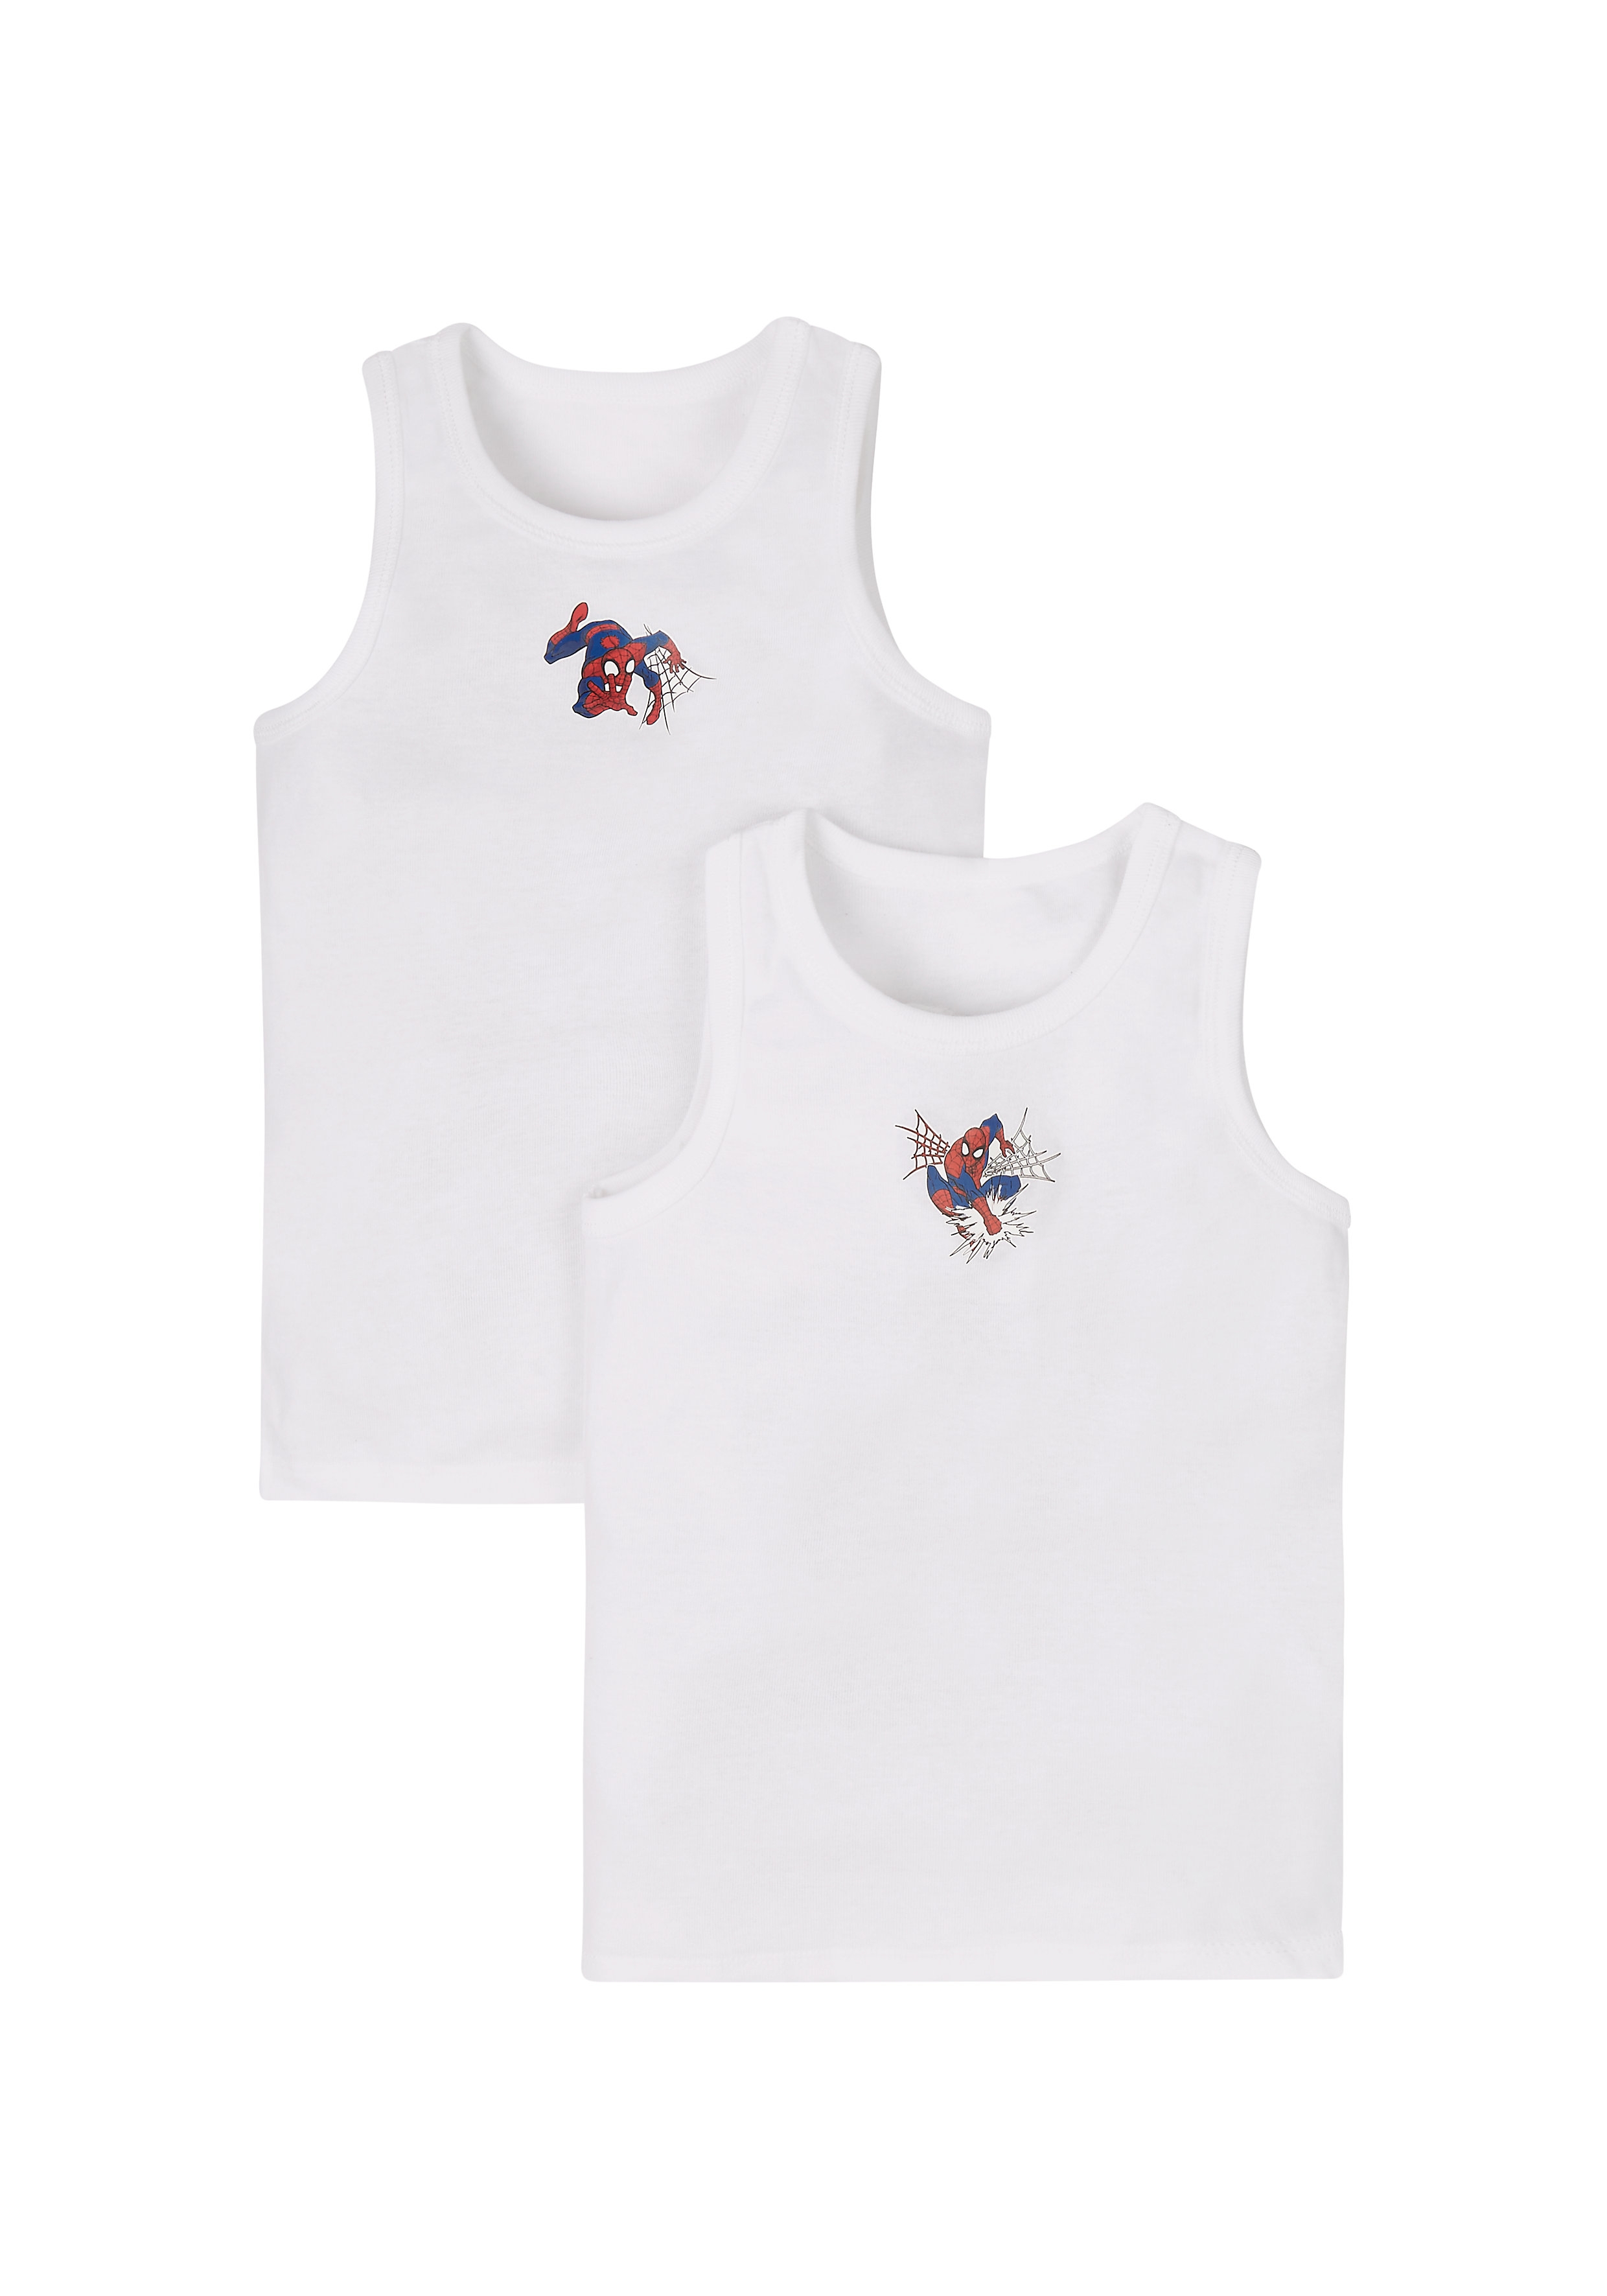 Mothercare | Boys Spiderman Vests - 2 Pack - White